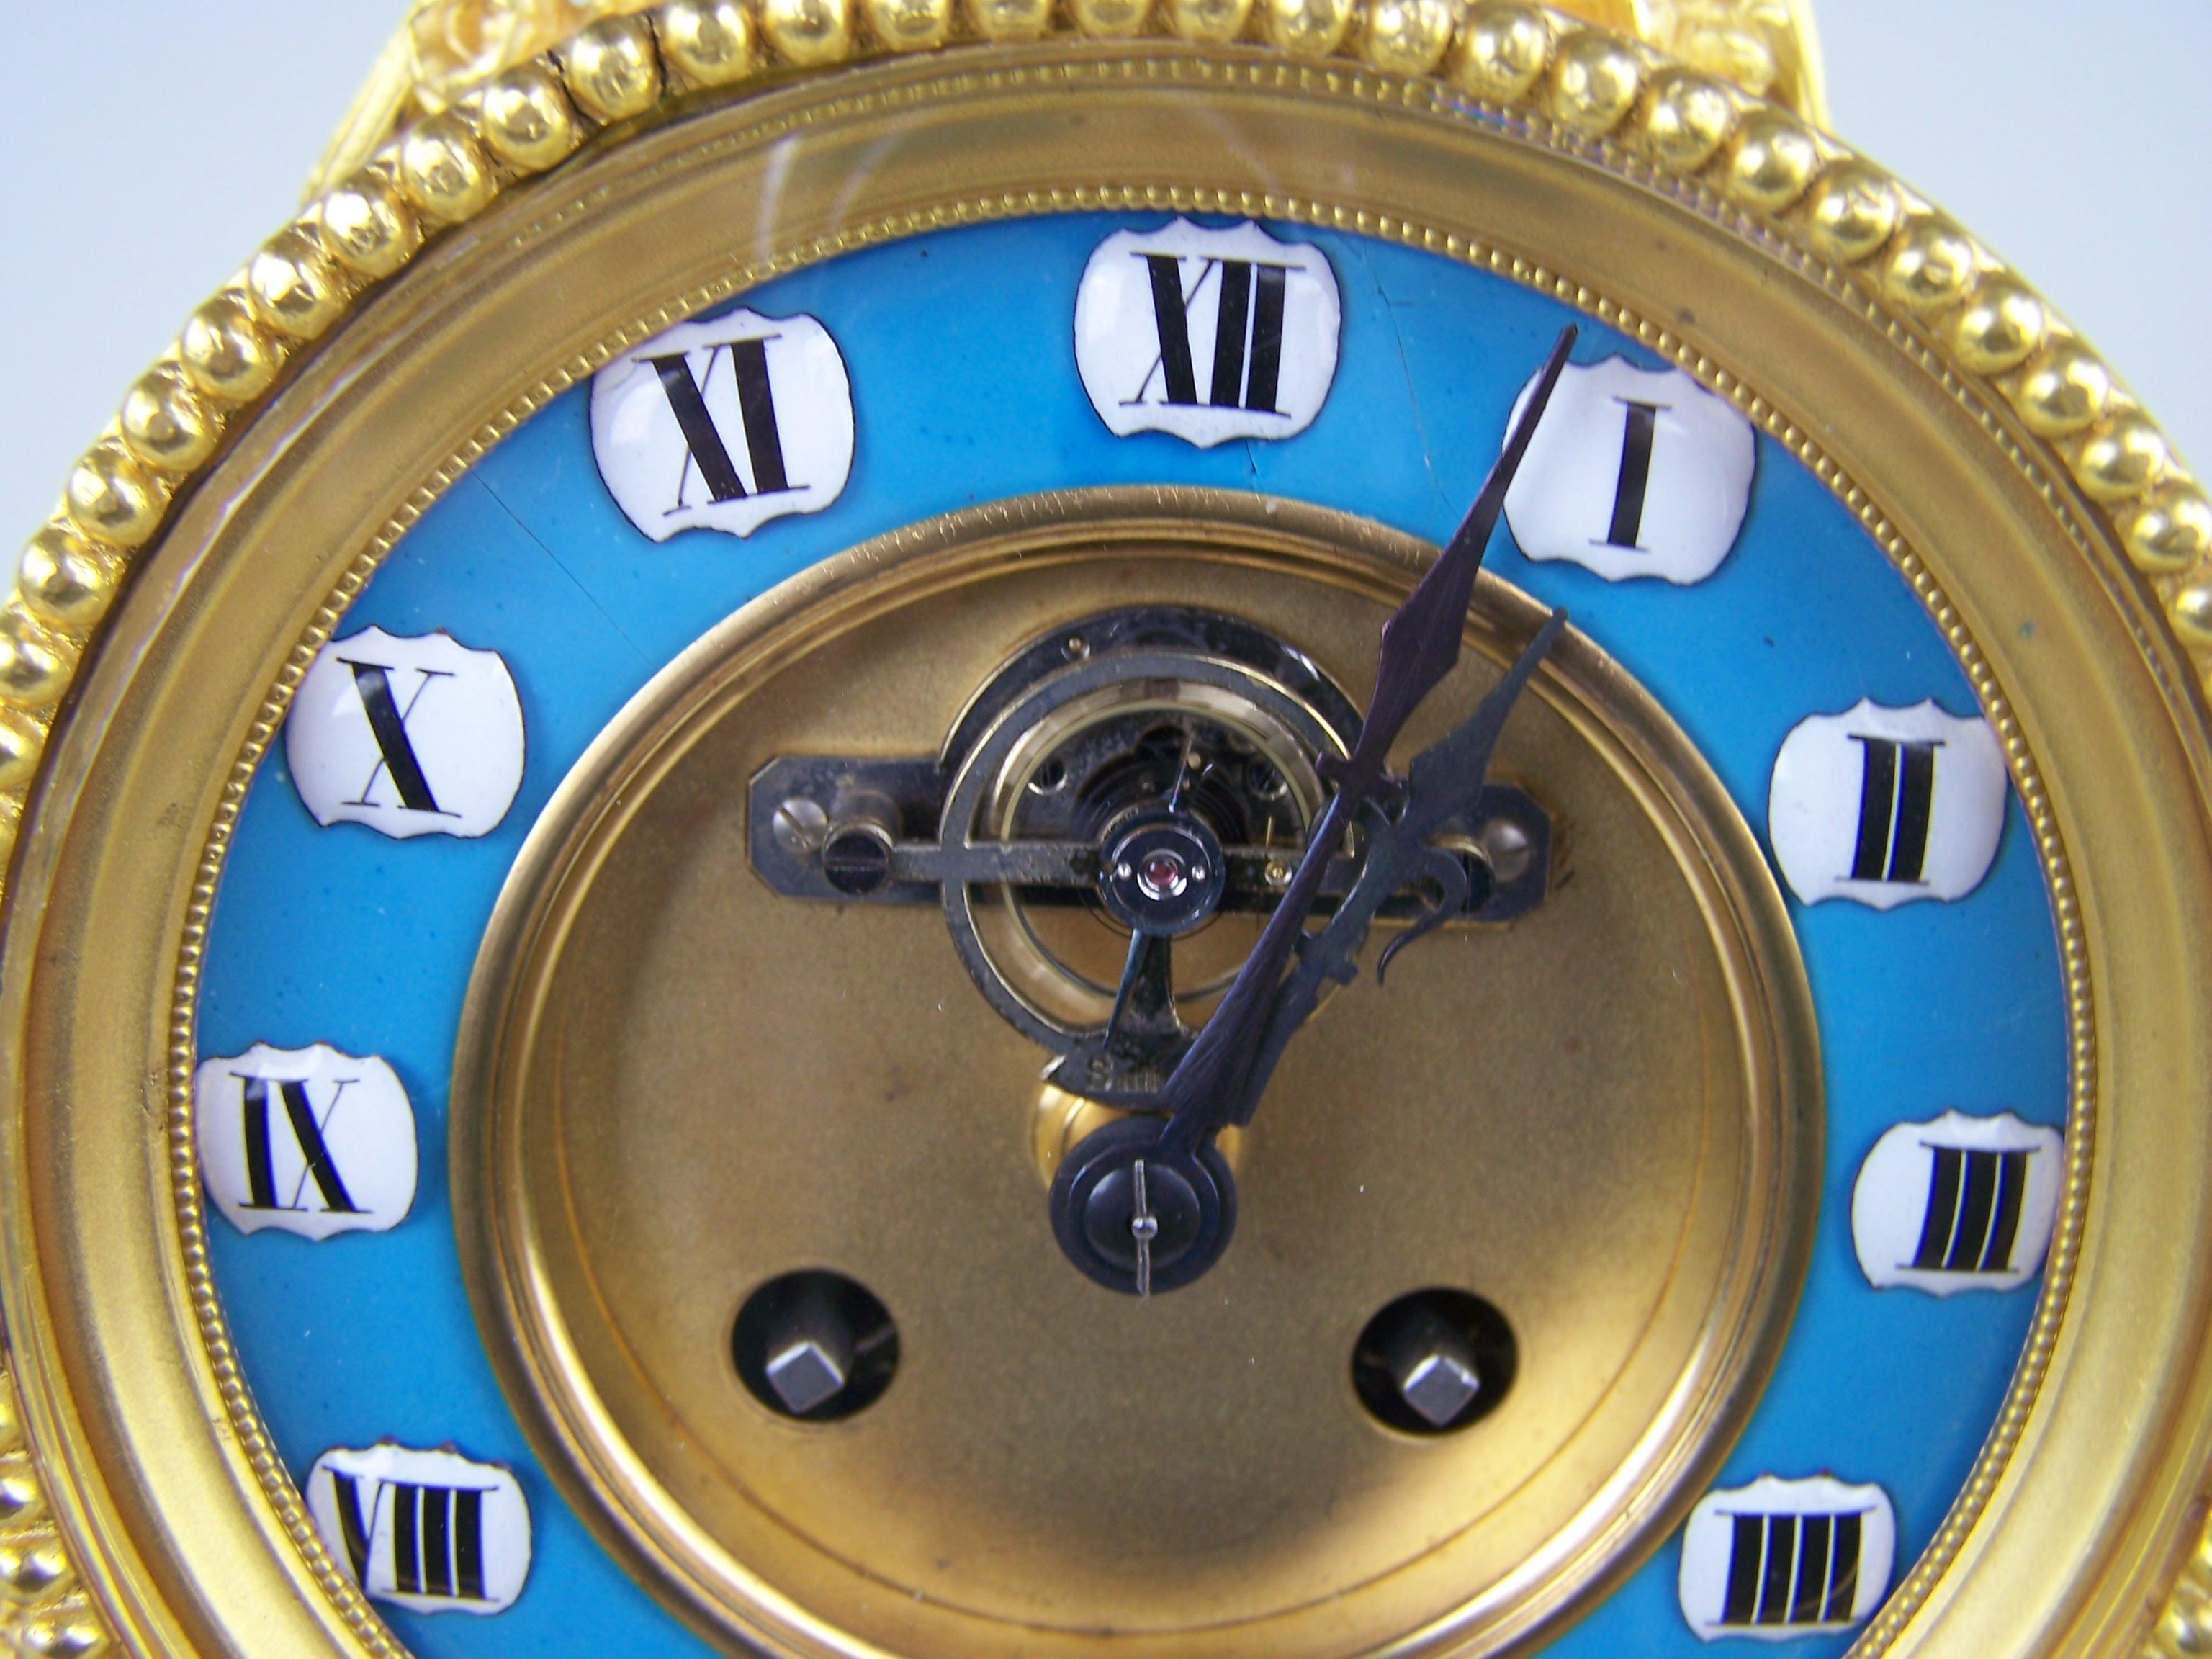 Cast Clock with Singing Bird Automaton and Musical Mechanism by Bontems